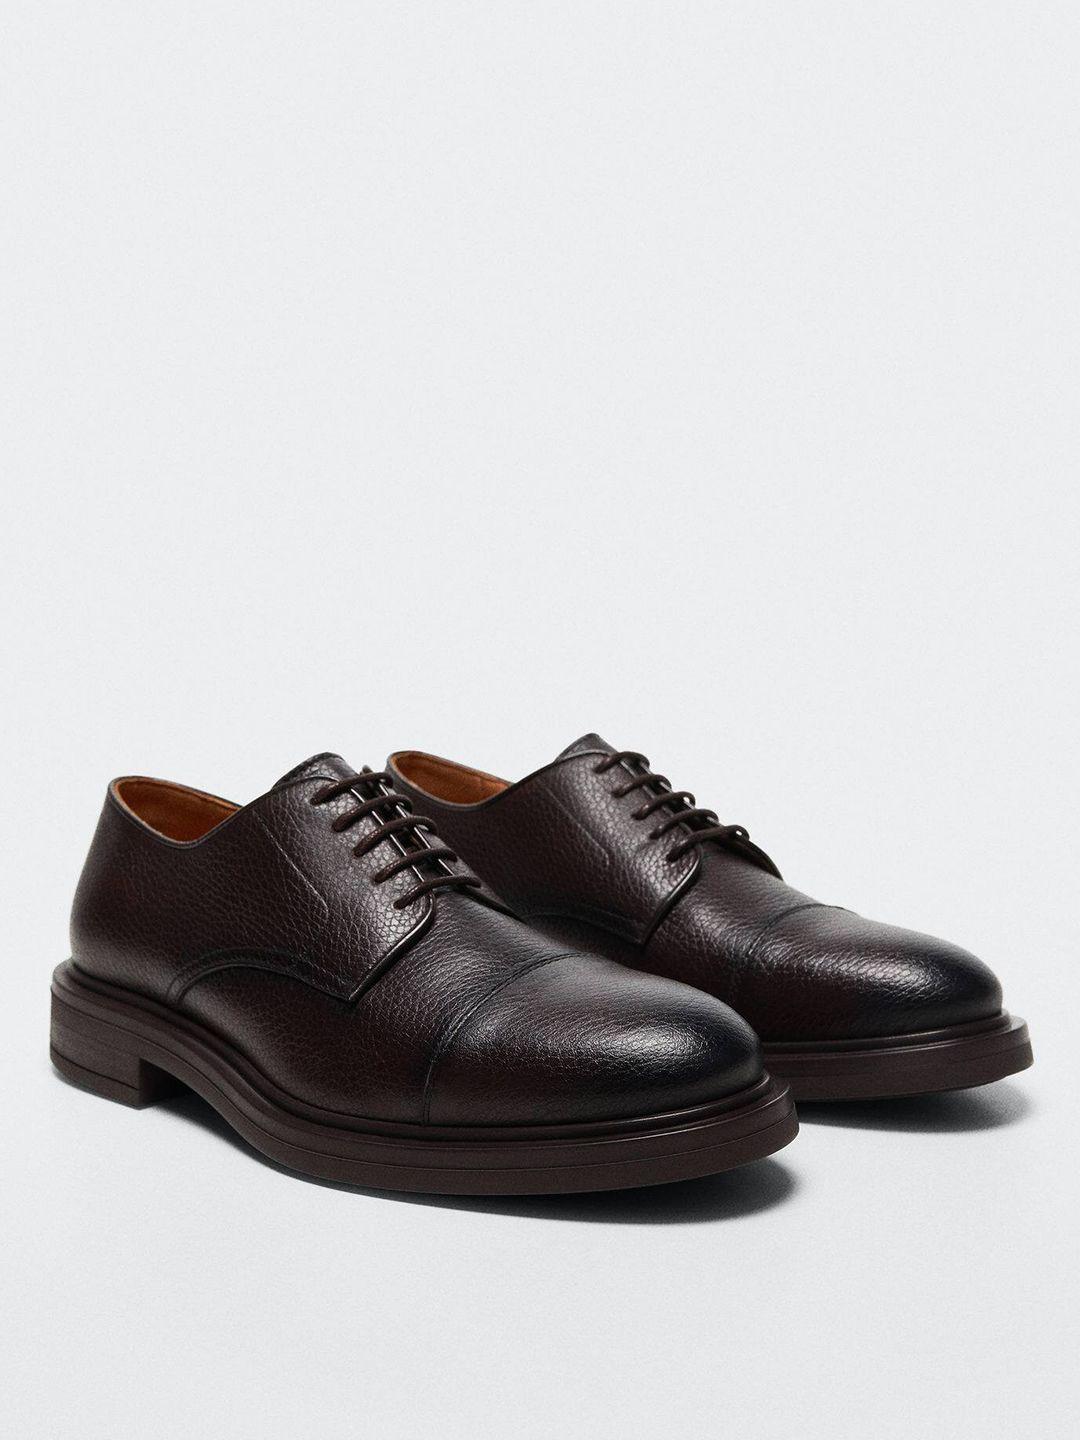 mango man textured leather sustainable formal derbys